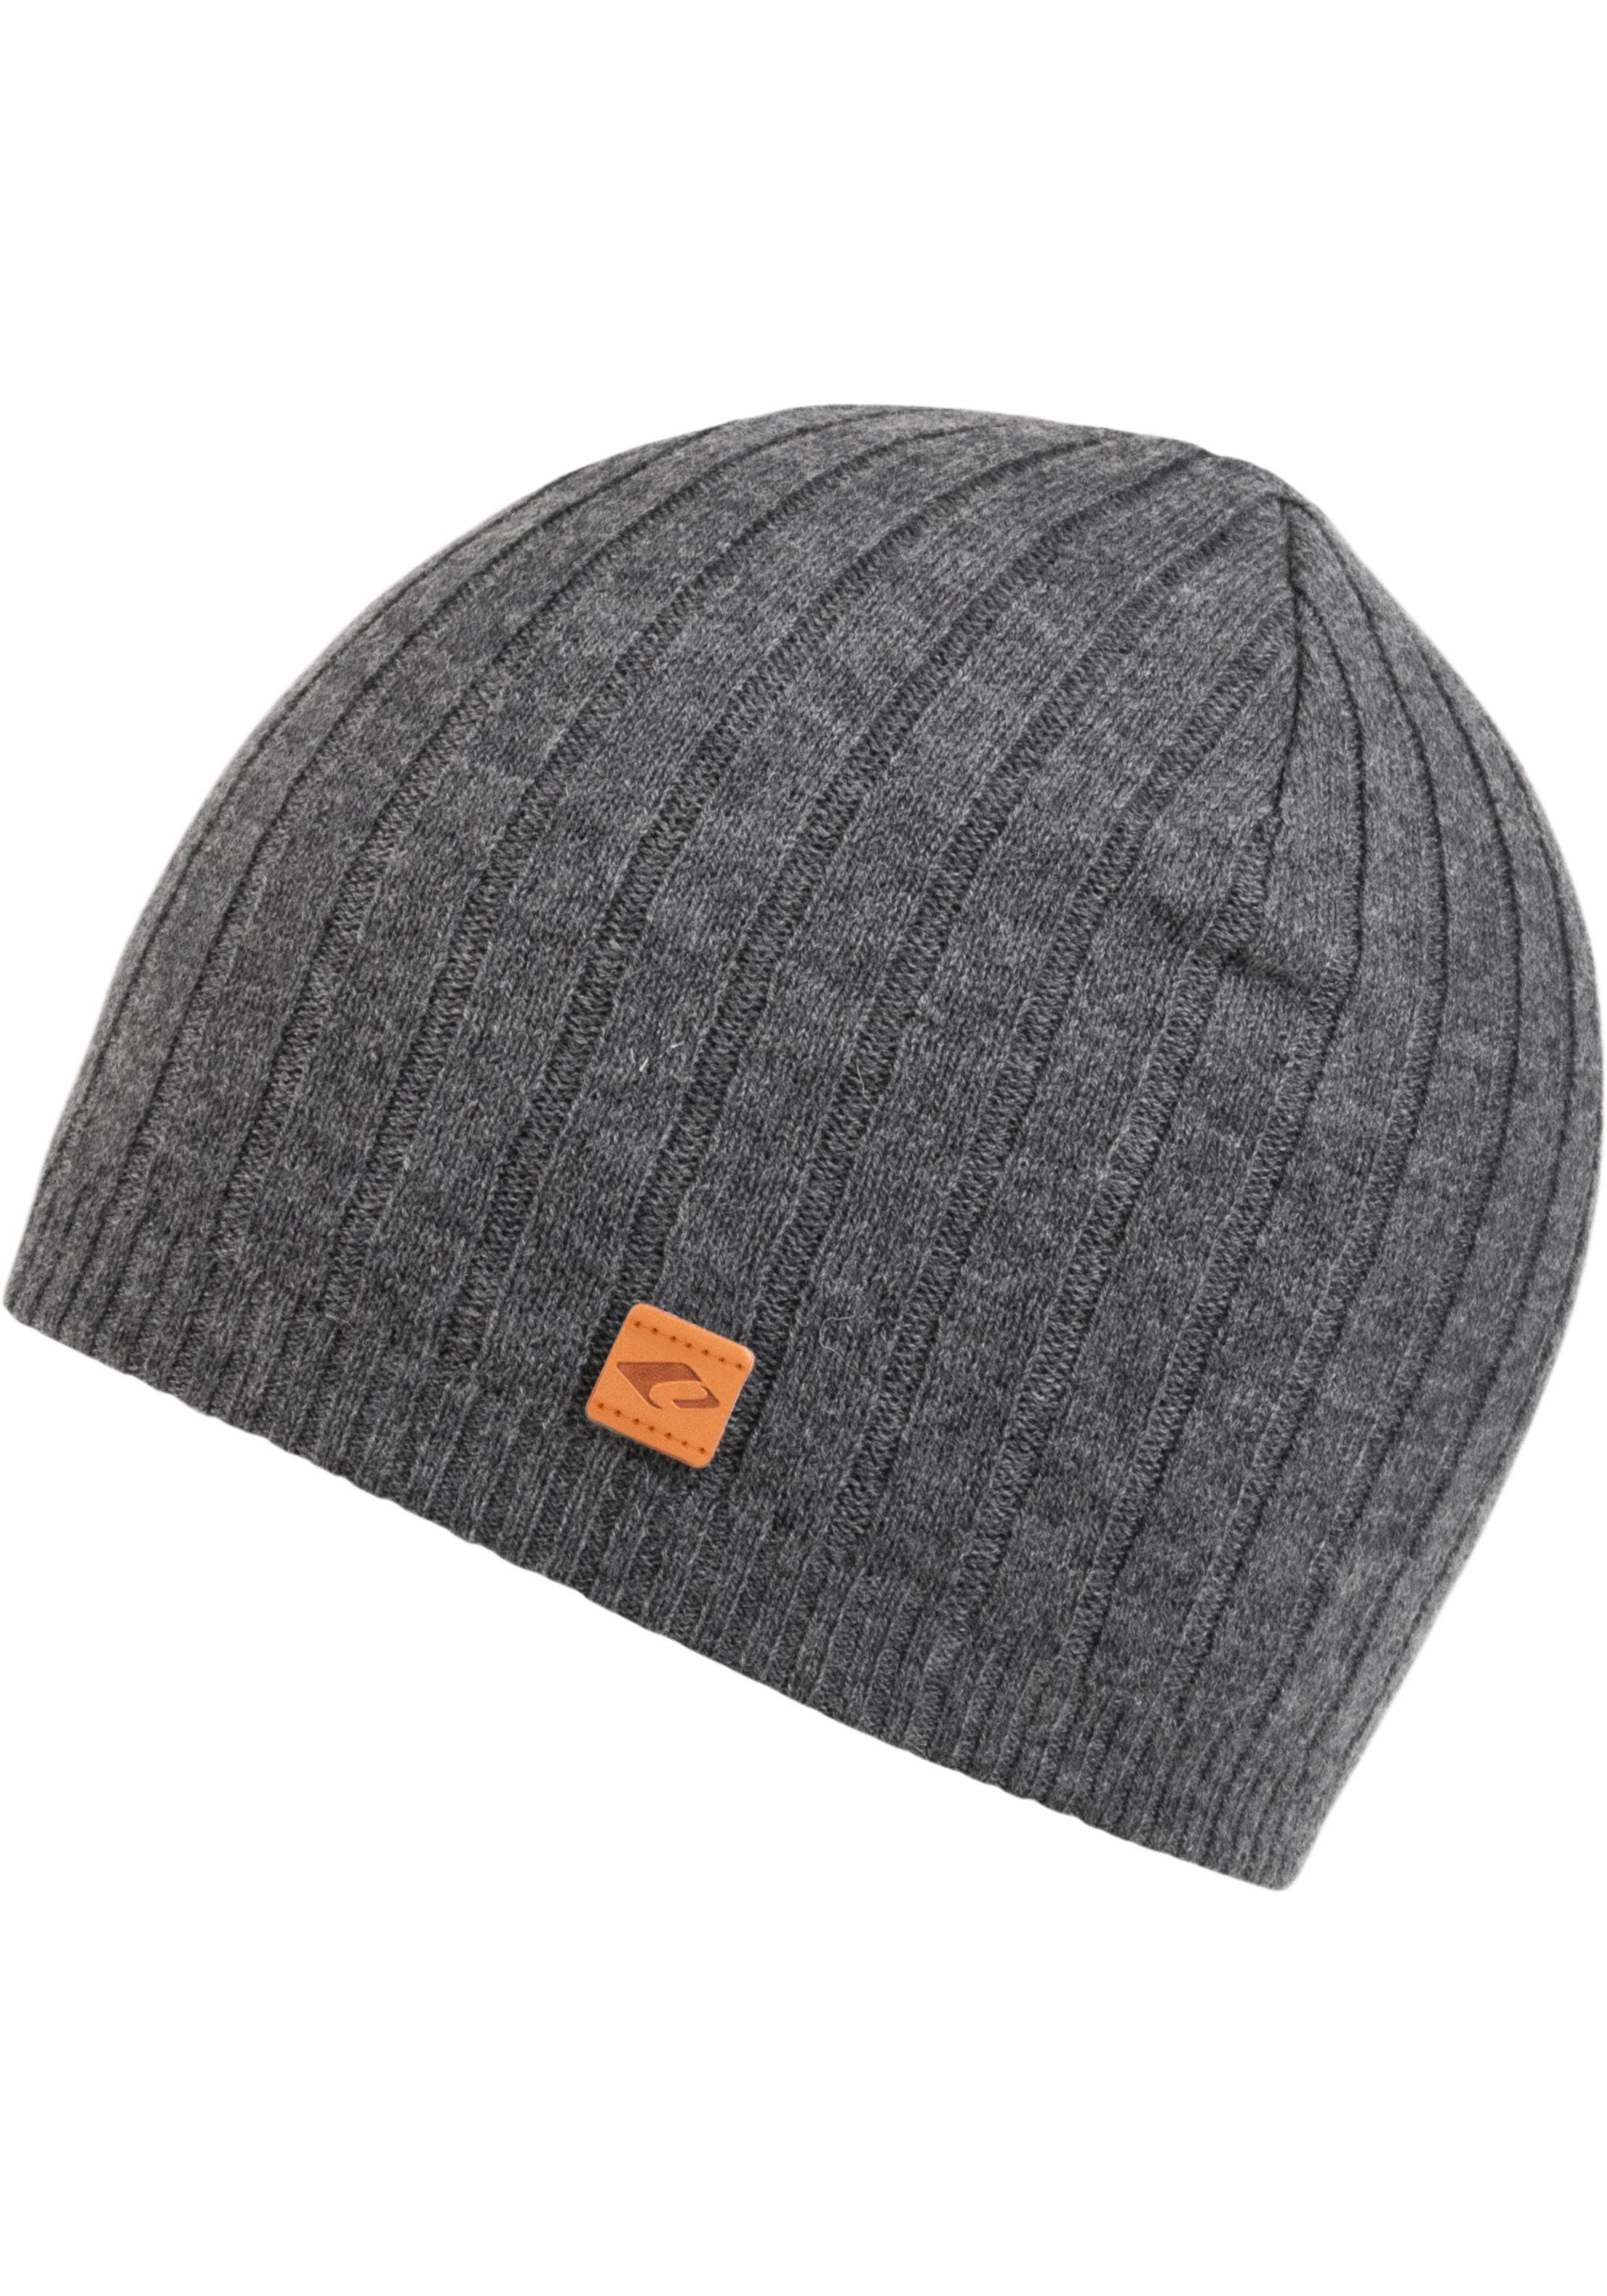 chillouts Beanie Alfred Hat Doppellagig, angenehm warm grey melange